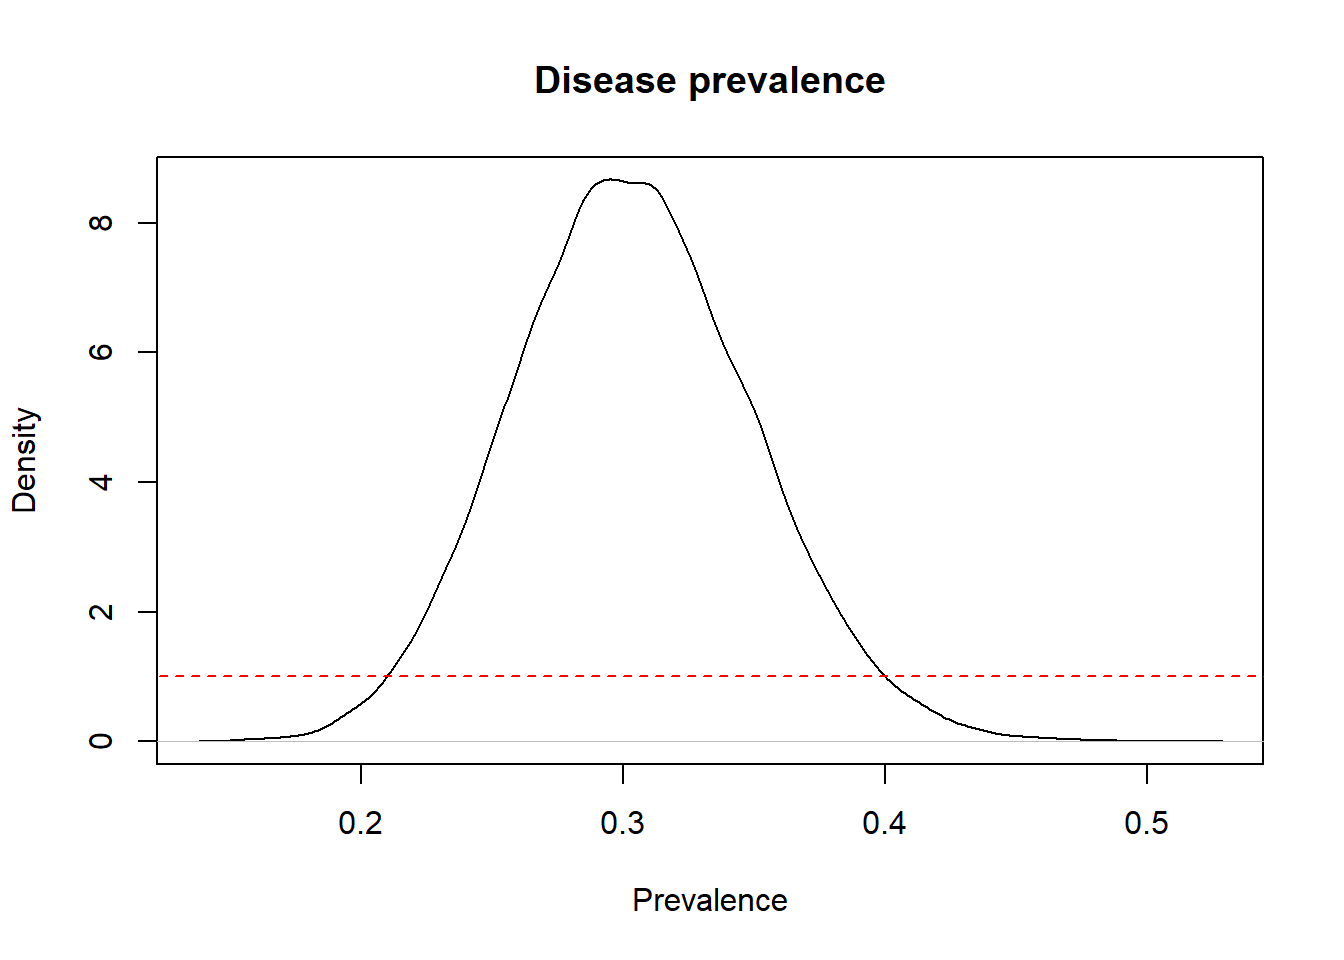 Prior (dashed red line) and posterior (full black line) distribution of the prevalence of disease.